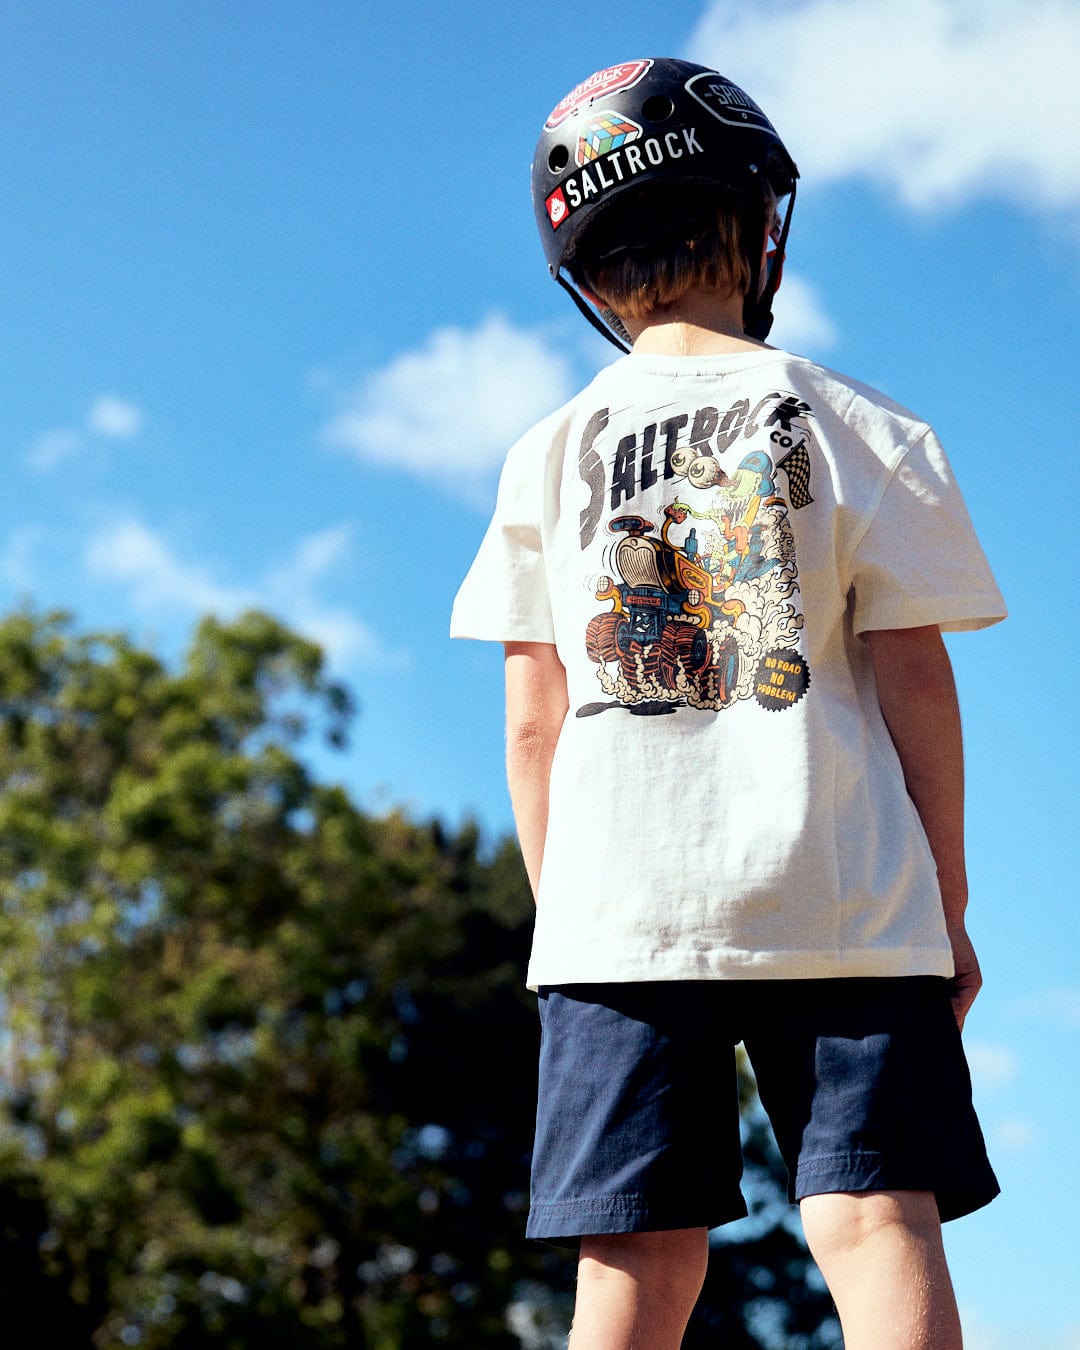 A child wearing a helmet and a t-shirt with Saltrock illustrations stands outdoors, viewed from the back, with tree branches and a blue sky visible above, wearing the No Road No Problem - Kids Short Sleeve T-Shirt - White by Saltrock.